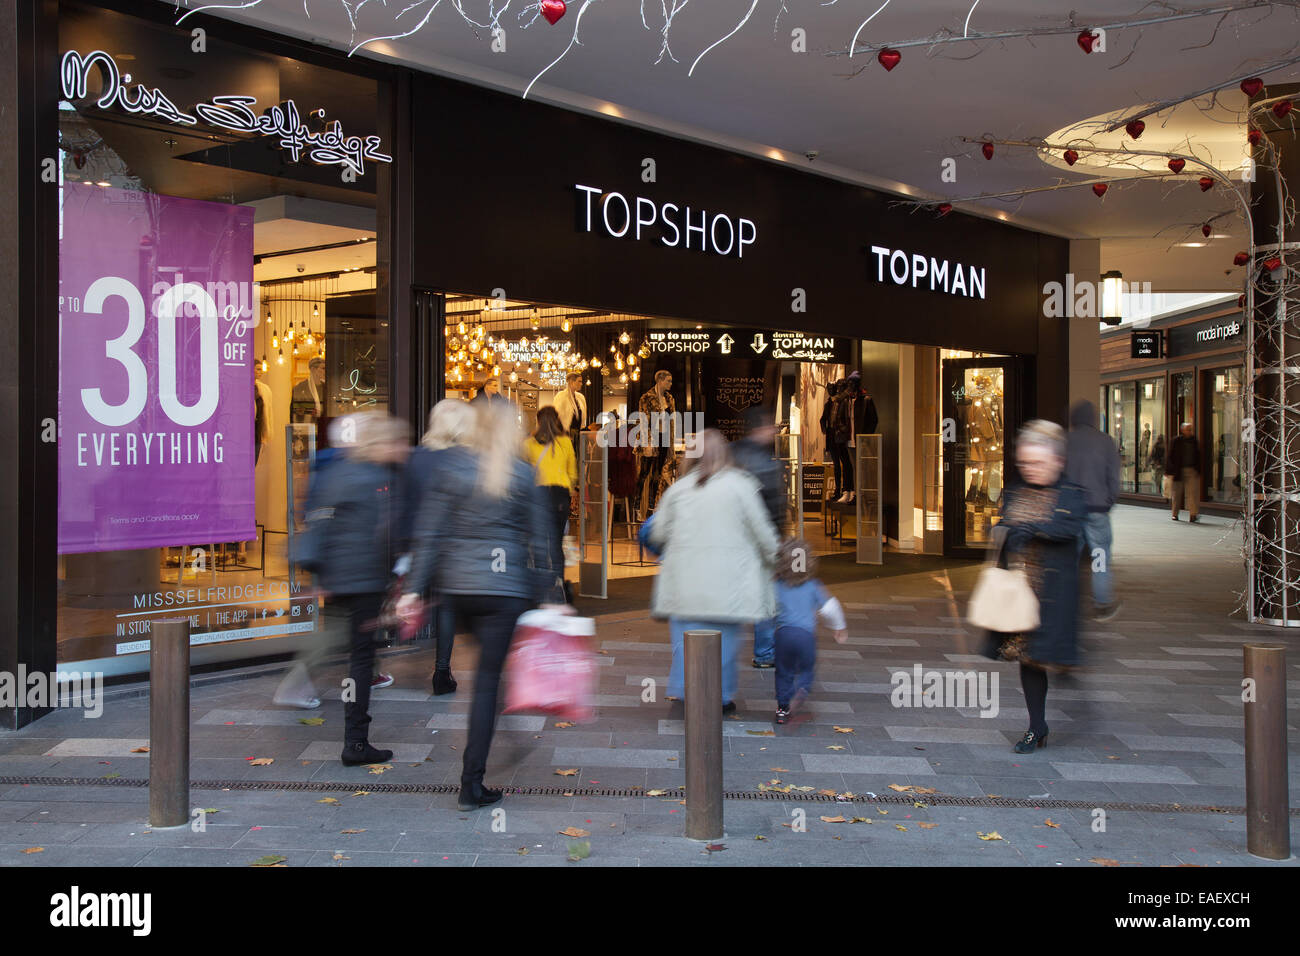 Up to 30% Thirty percent discounts on everything at TopShop & TopMan  department store in Liverpool, Merseyside, UK. Liverpools business district  Stock Photo - Alamy